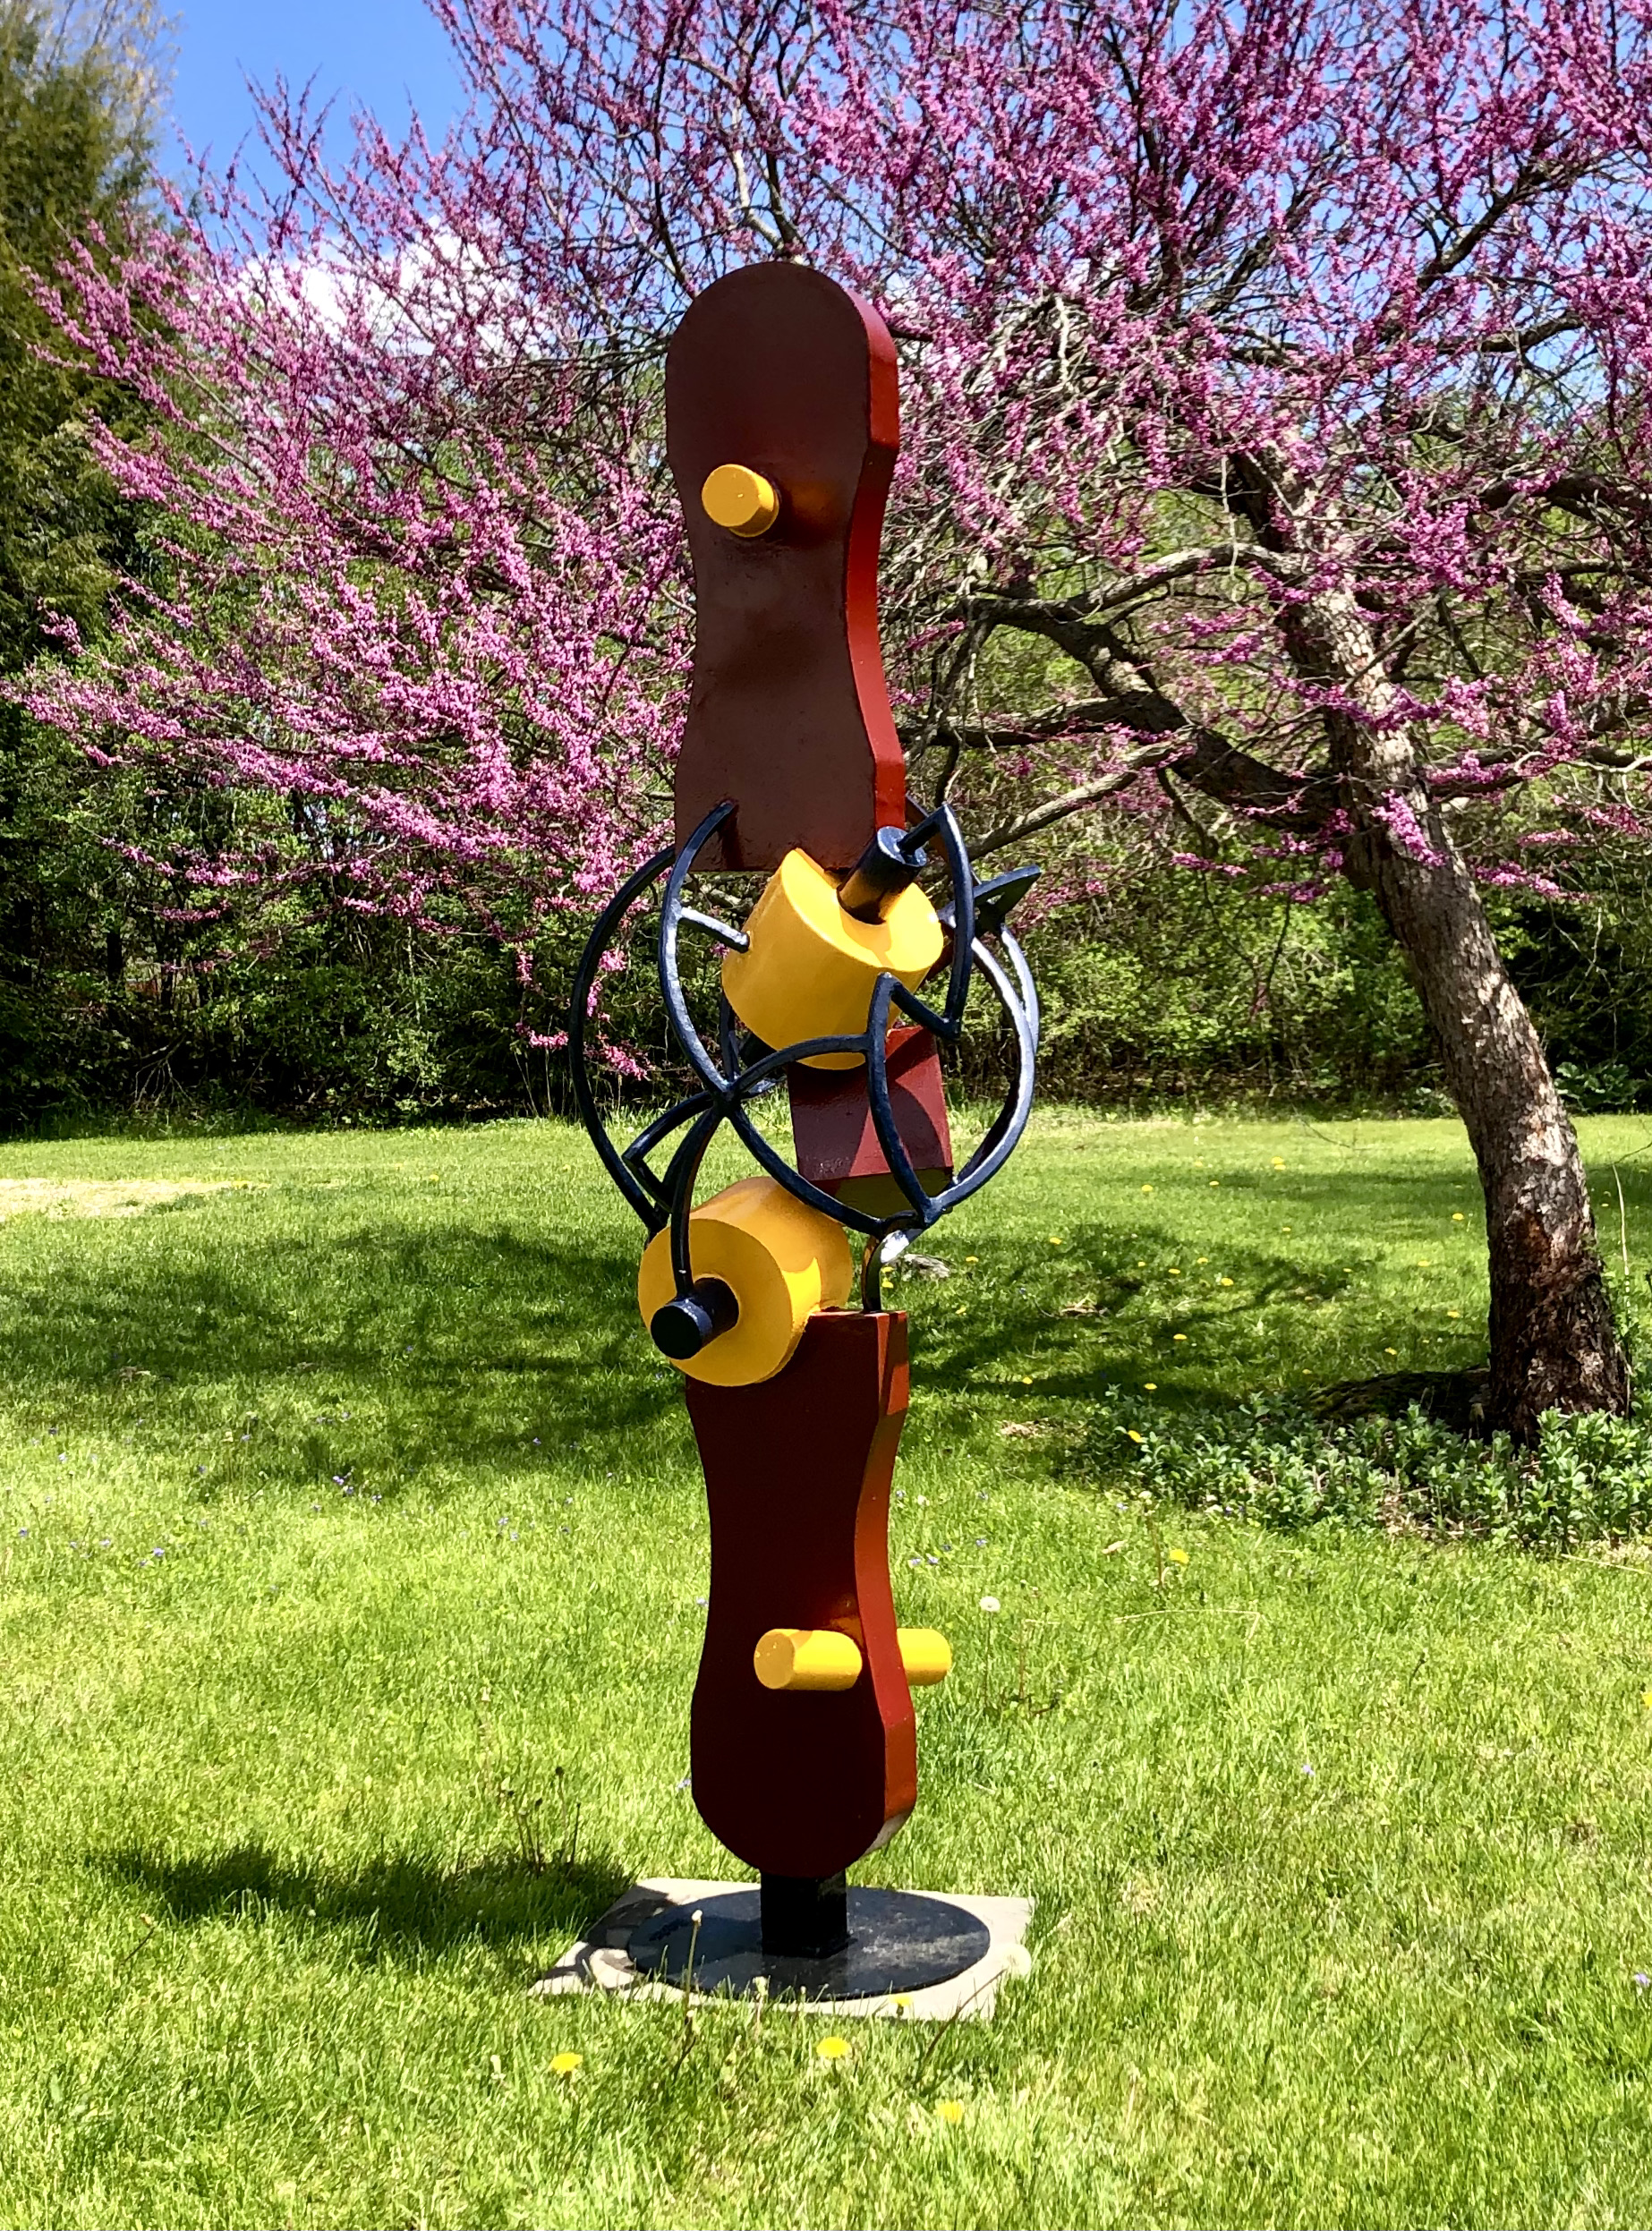 A vibrant, outdoor sculpture with colorful components is artistically presented in a scene of lush green grass and blooming tree.